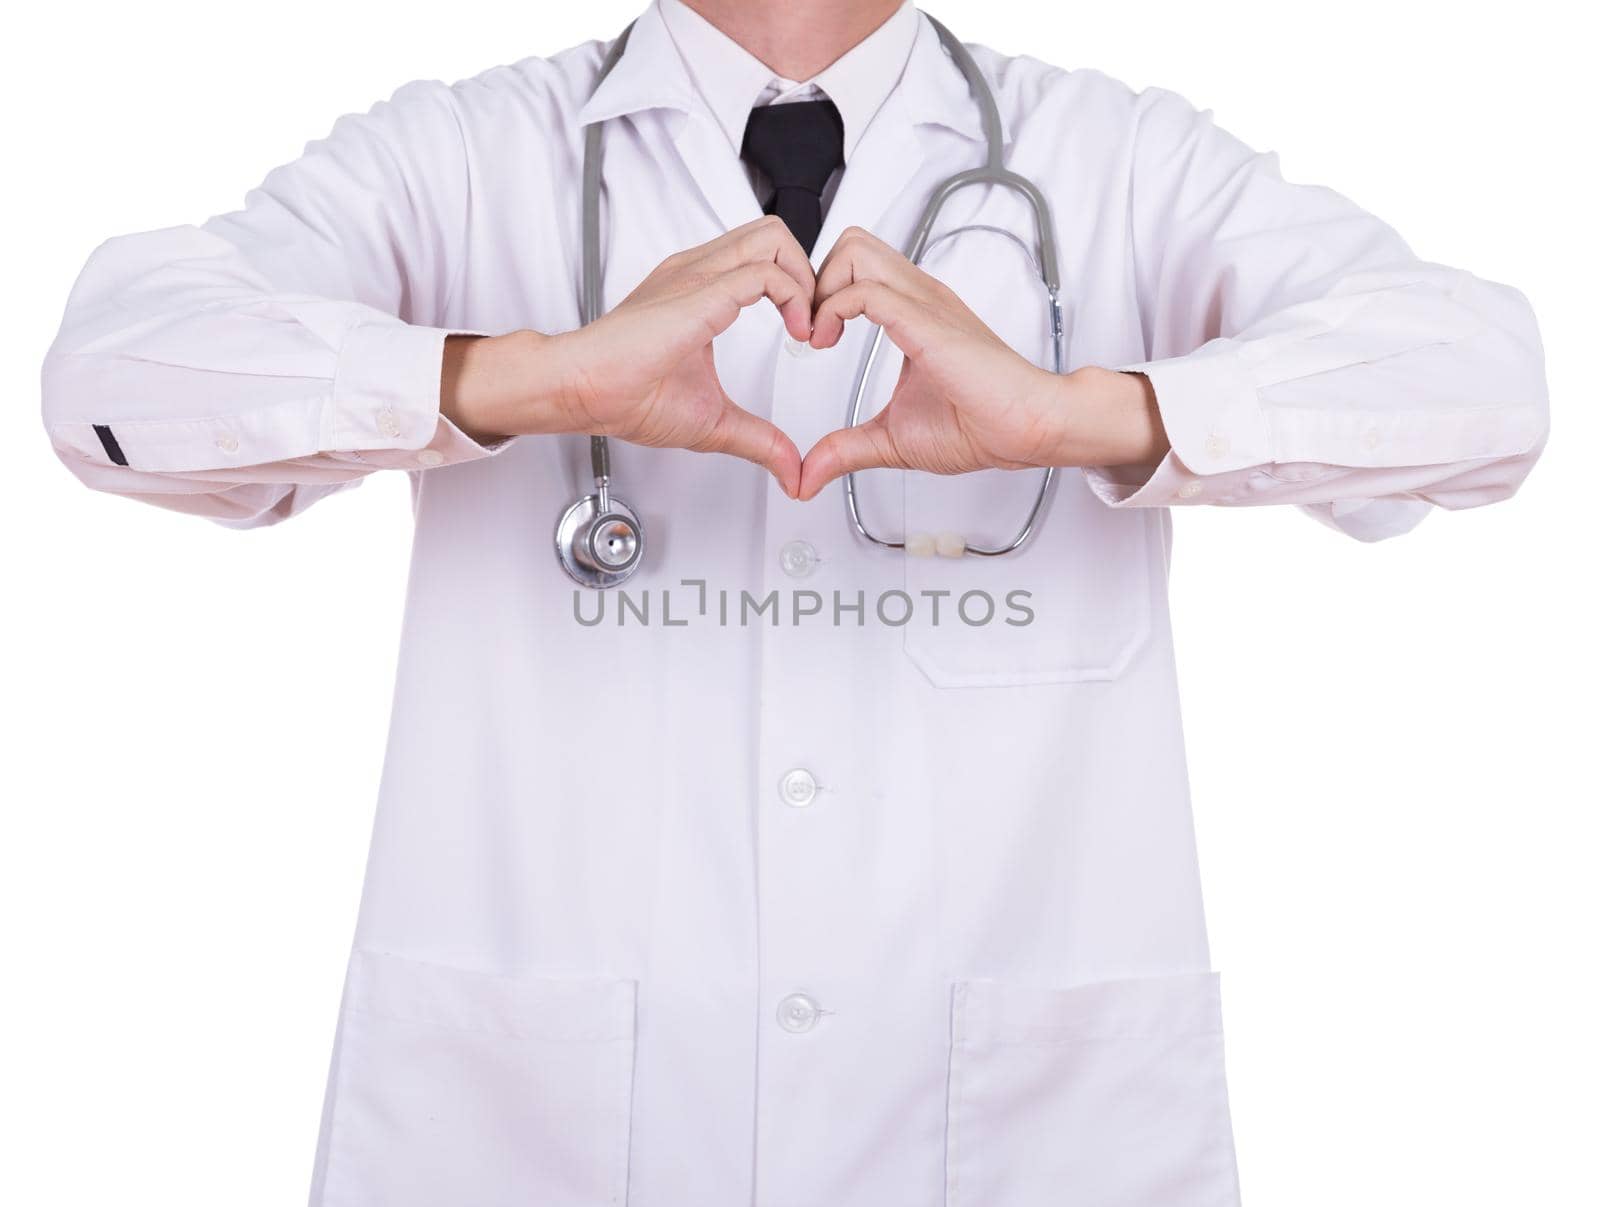 ckise-up of doctor doing a heart with his hands